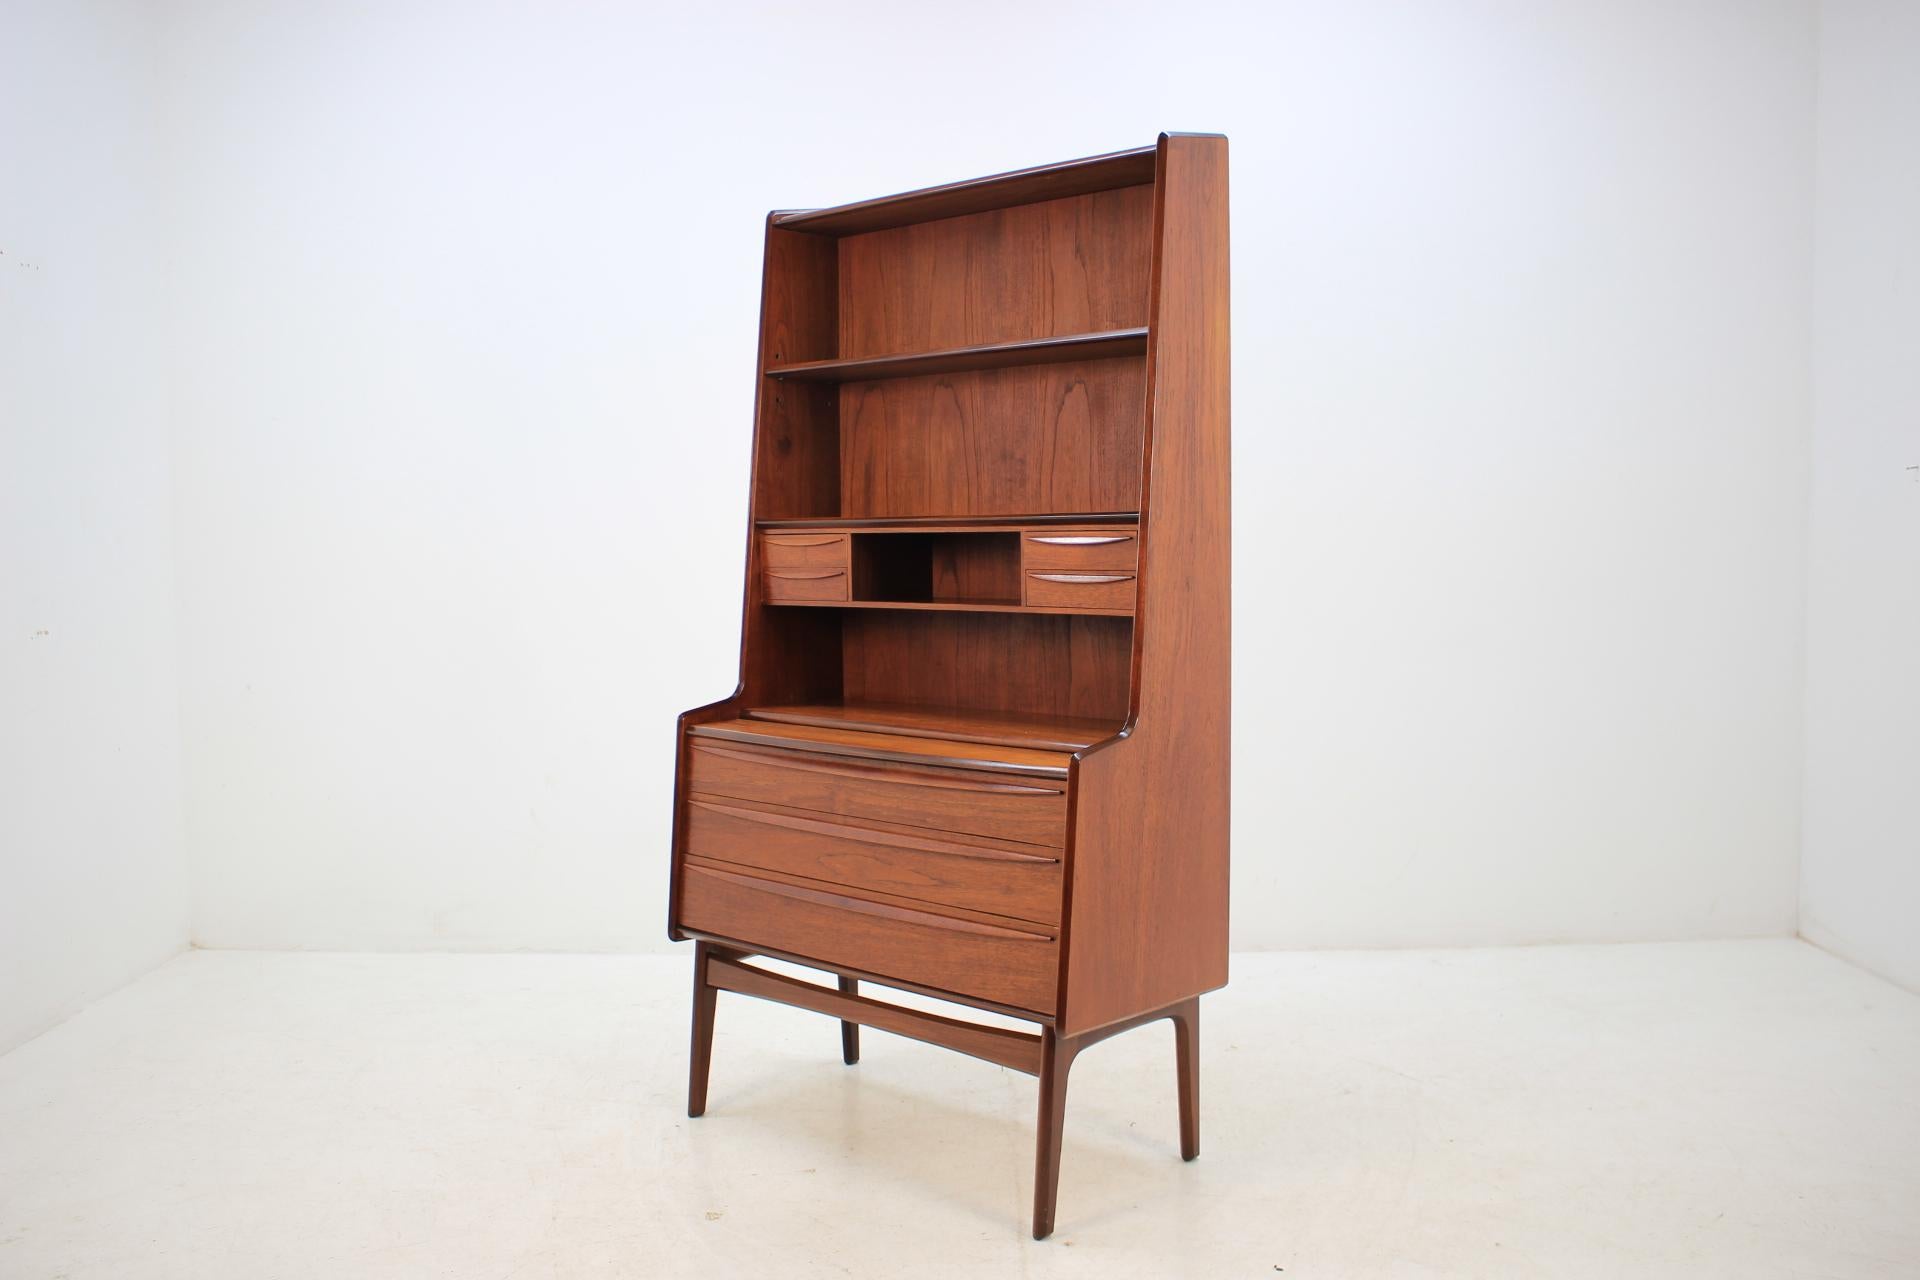 This Danish teak writing cabinet features seven drawers and shelves. The extendable writing area desk can be extended up to 65 cm. This item was carefully refurbished.